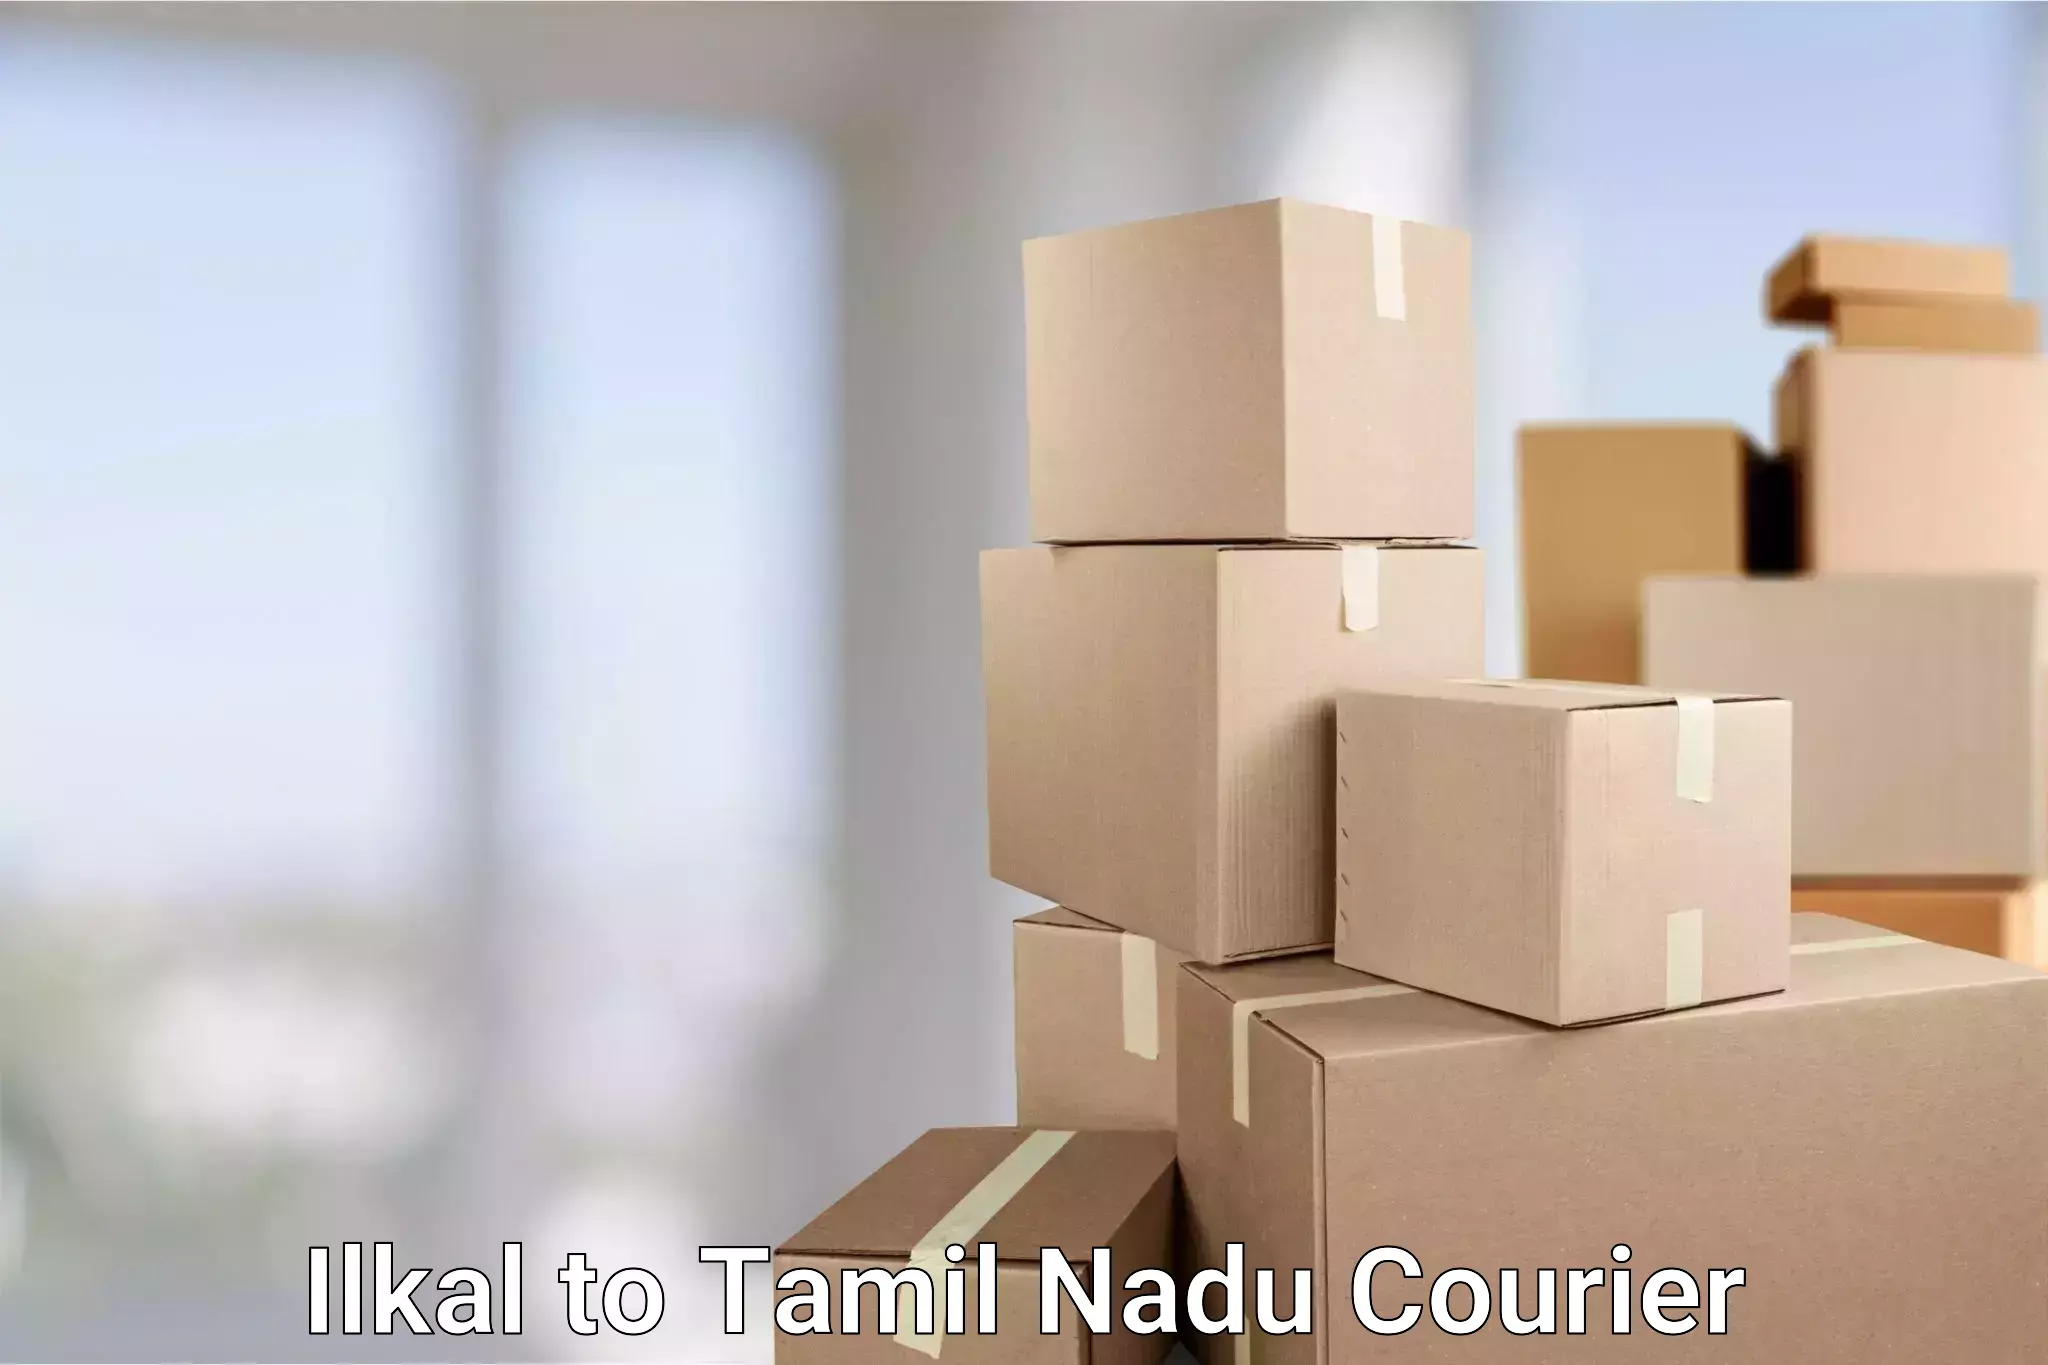 Advanced shipping technology in Ilkal to Mettur